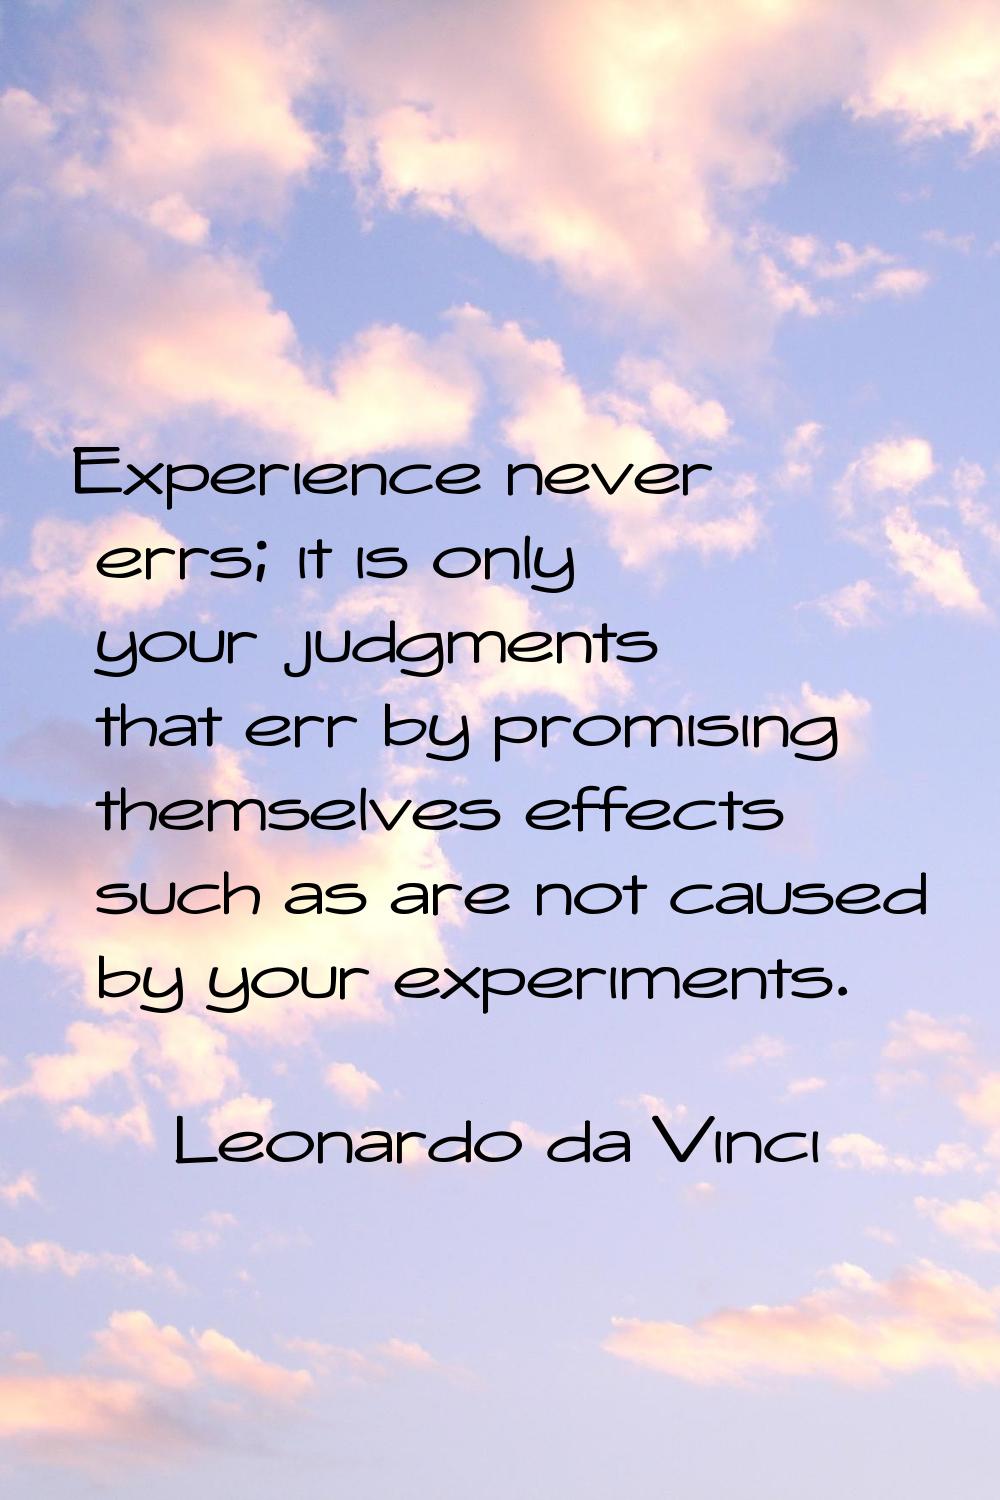 Experience never errs; it is only your judgments that err by promising themselves effects such as a